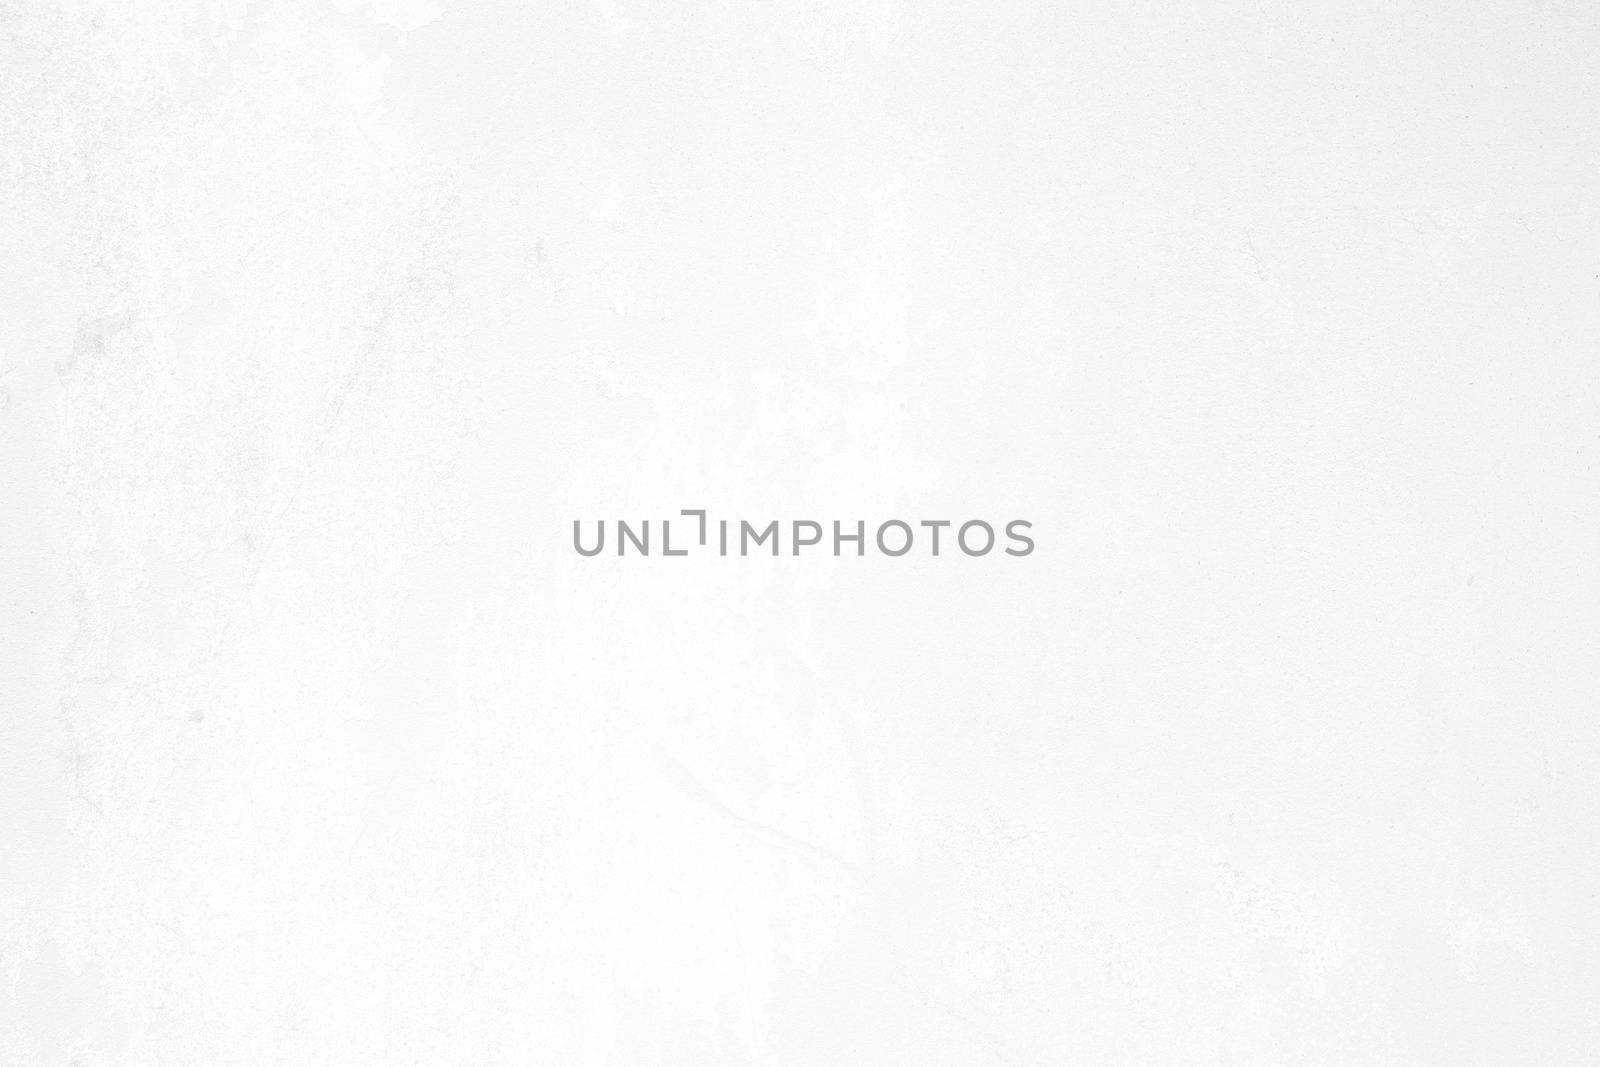 White Peeling Paint Concrete Wall Texture Background Suitable for Presentation and Web Templates with Space for Text.